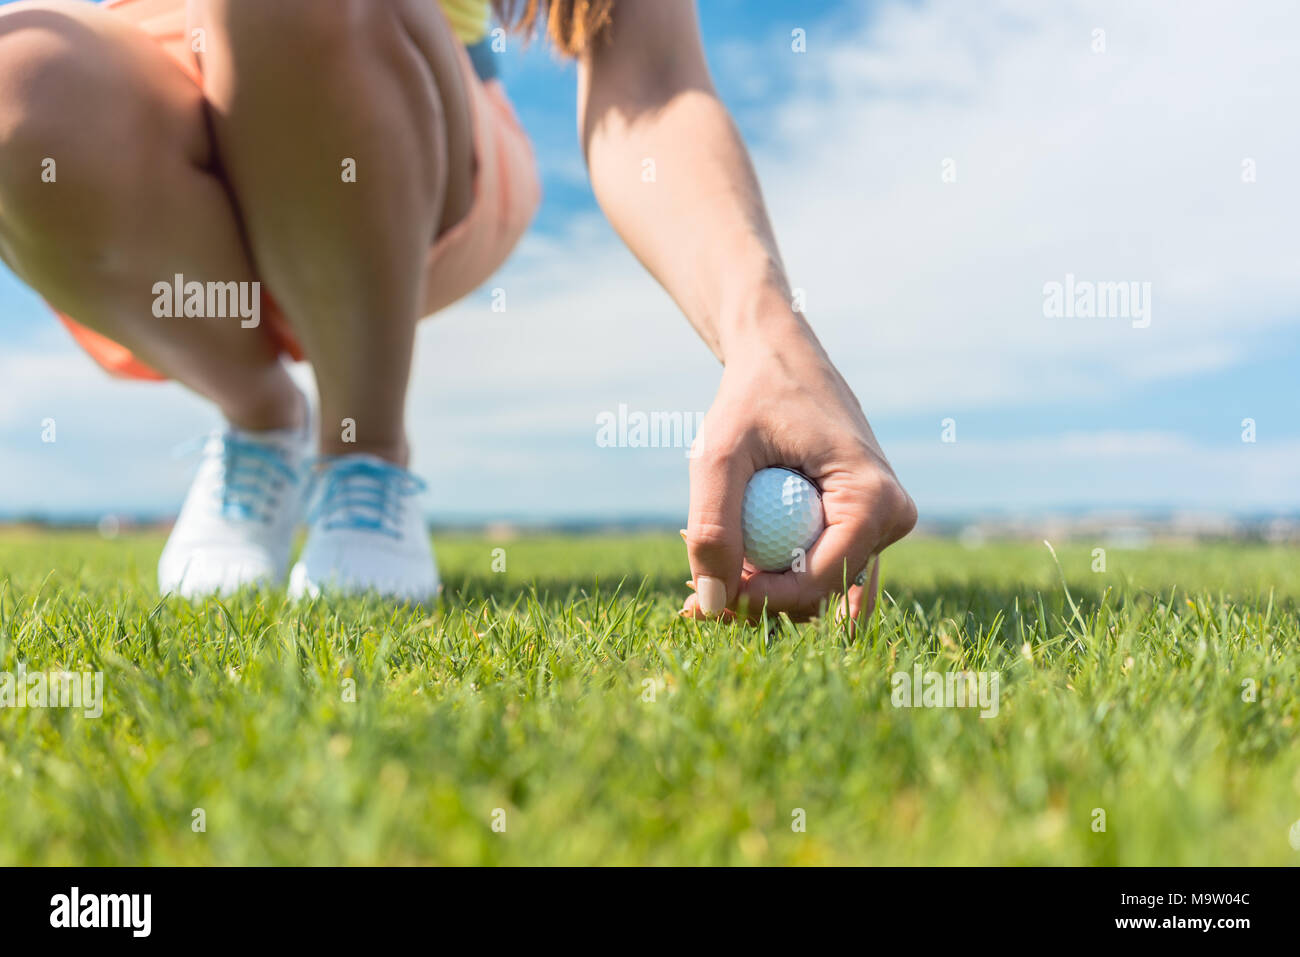 Close-up of the hand of a female player holding a ball above the grass Stock Photo